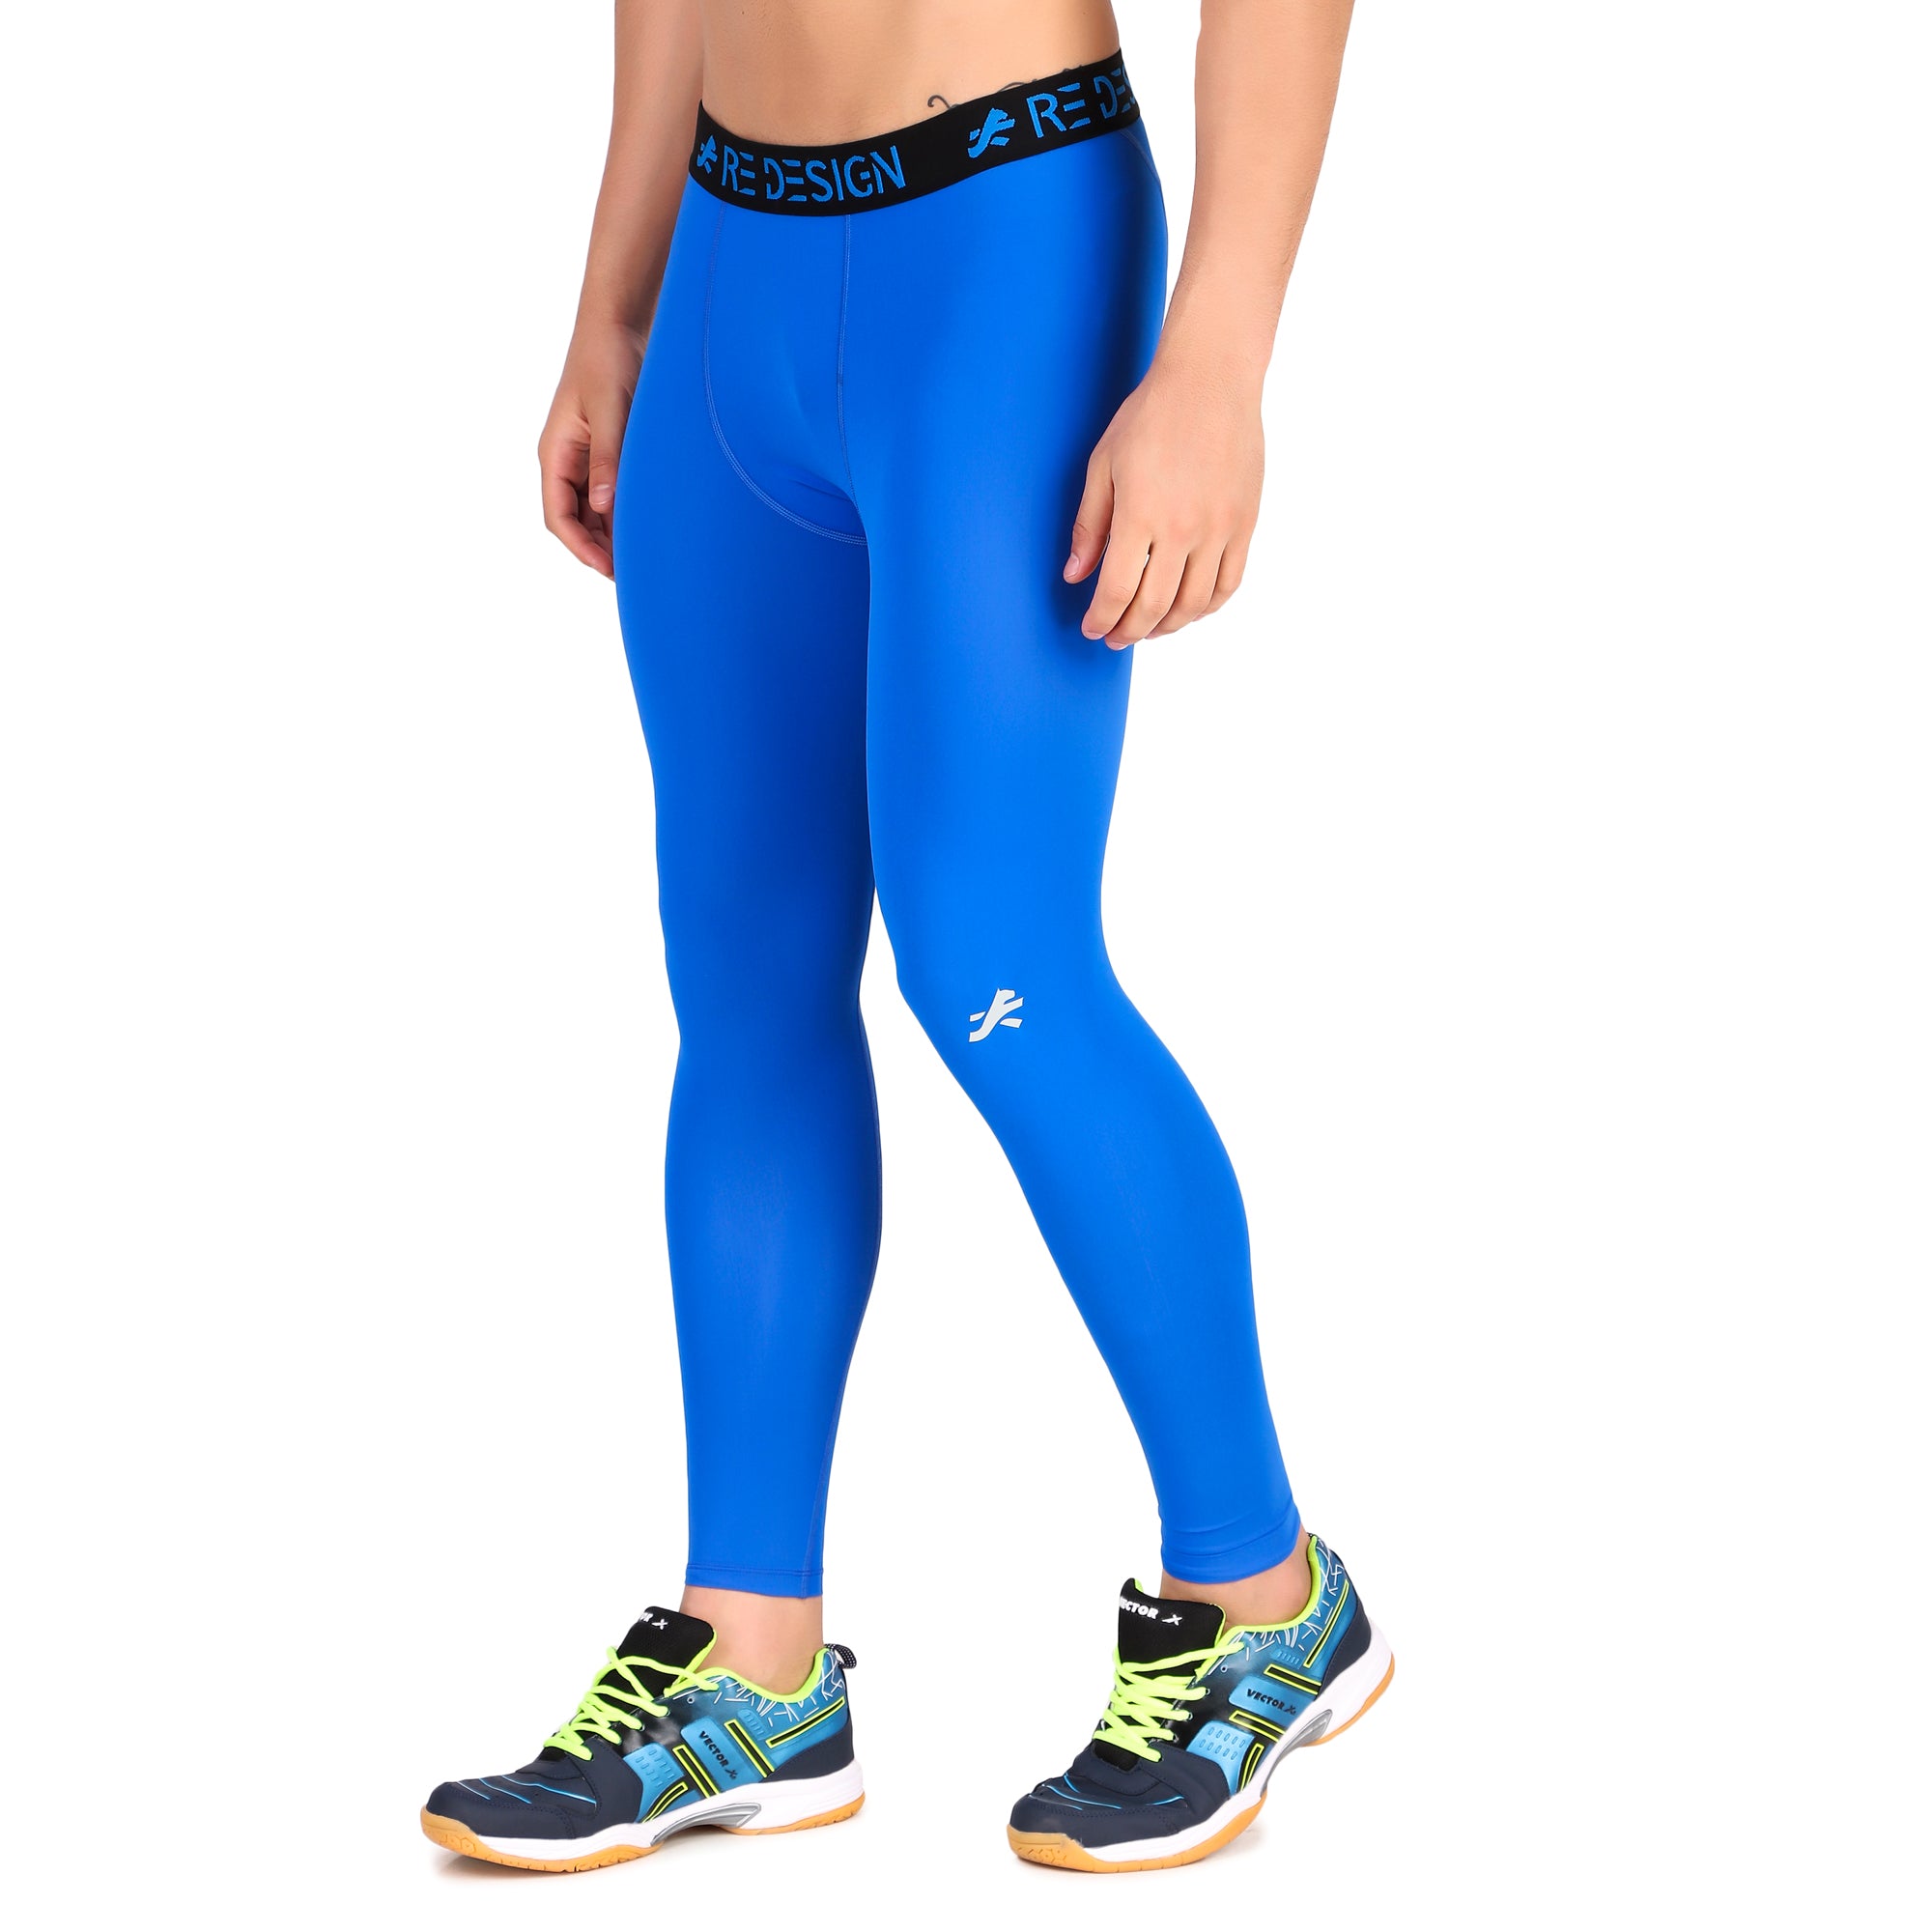 Nylon Compression Pant and Full Tights For Men (Royal Blue